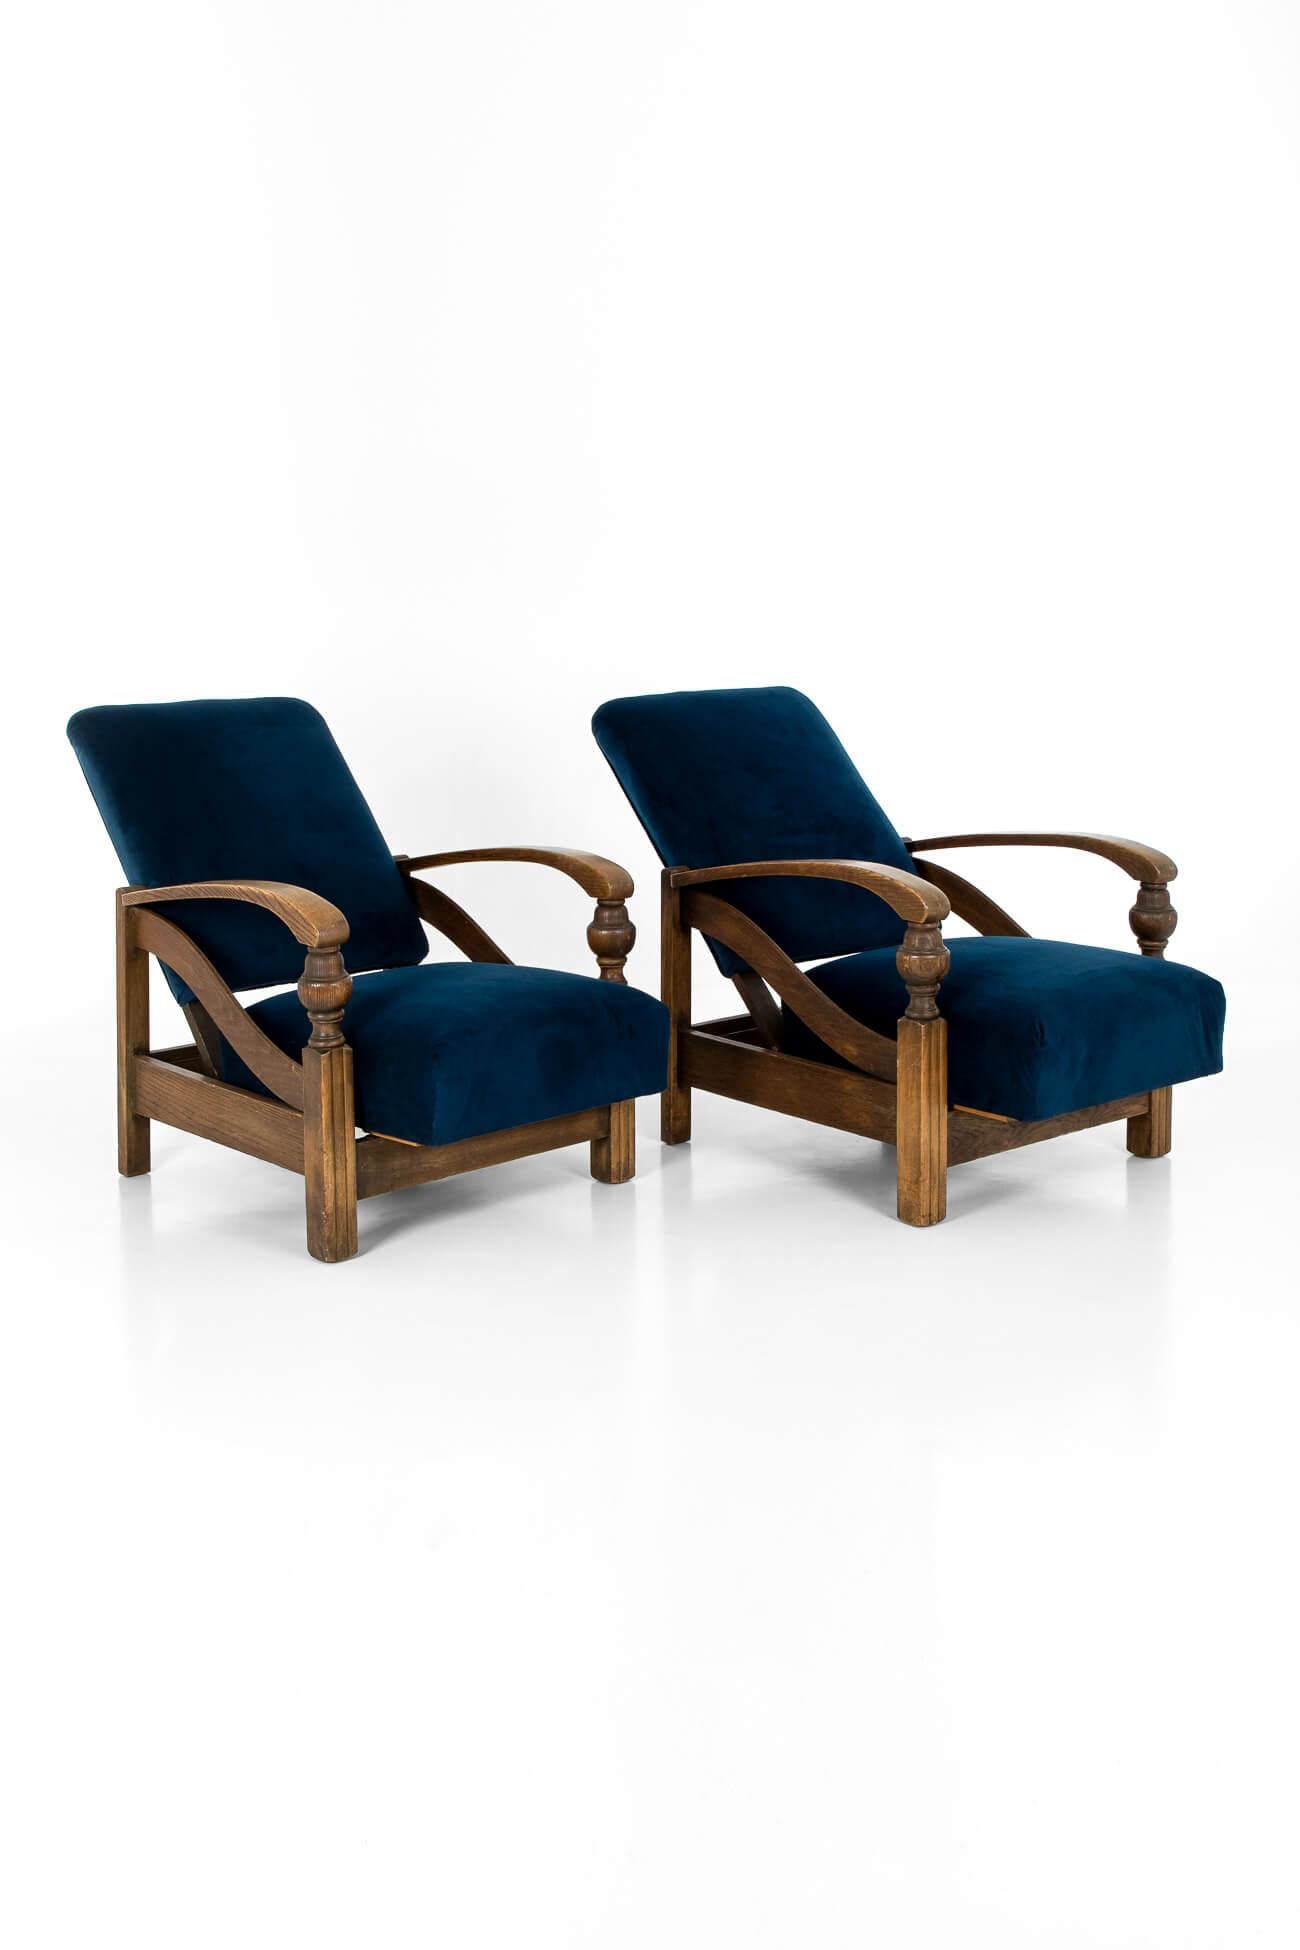 British Pair of Art Deco Lounge Chairs For Sale